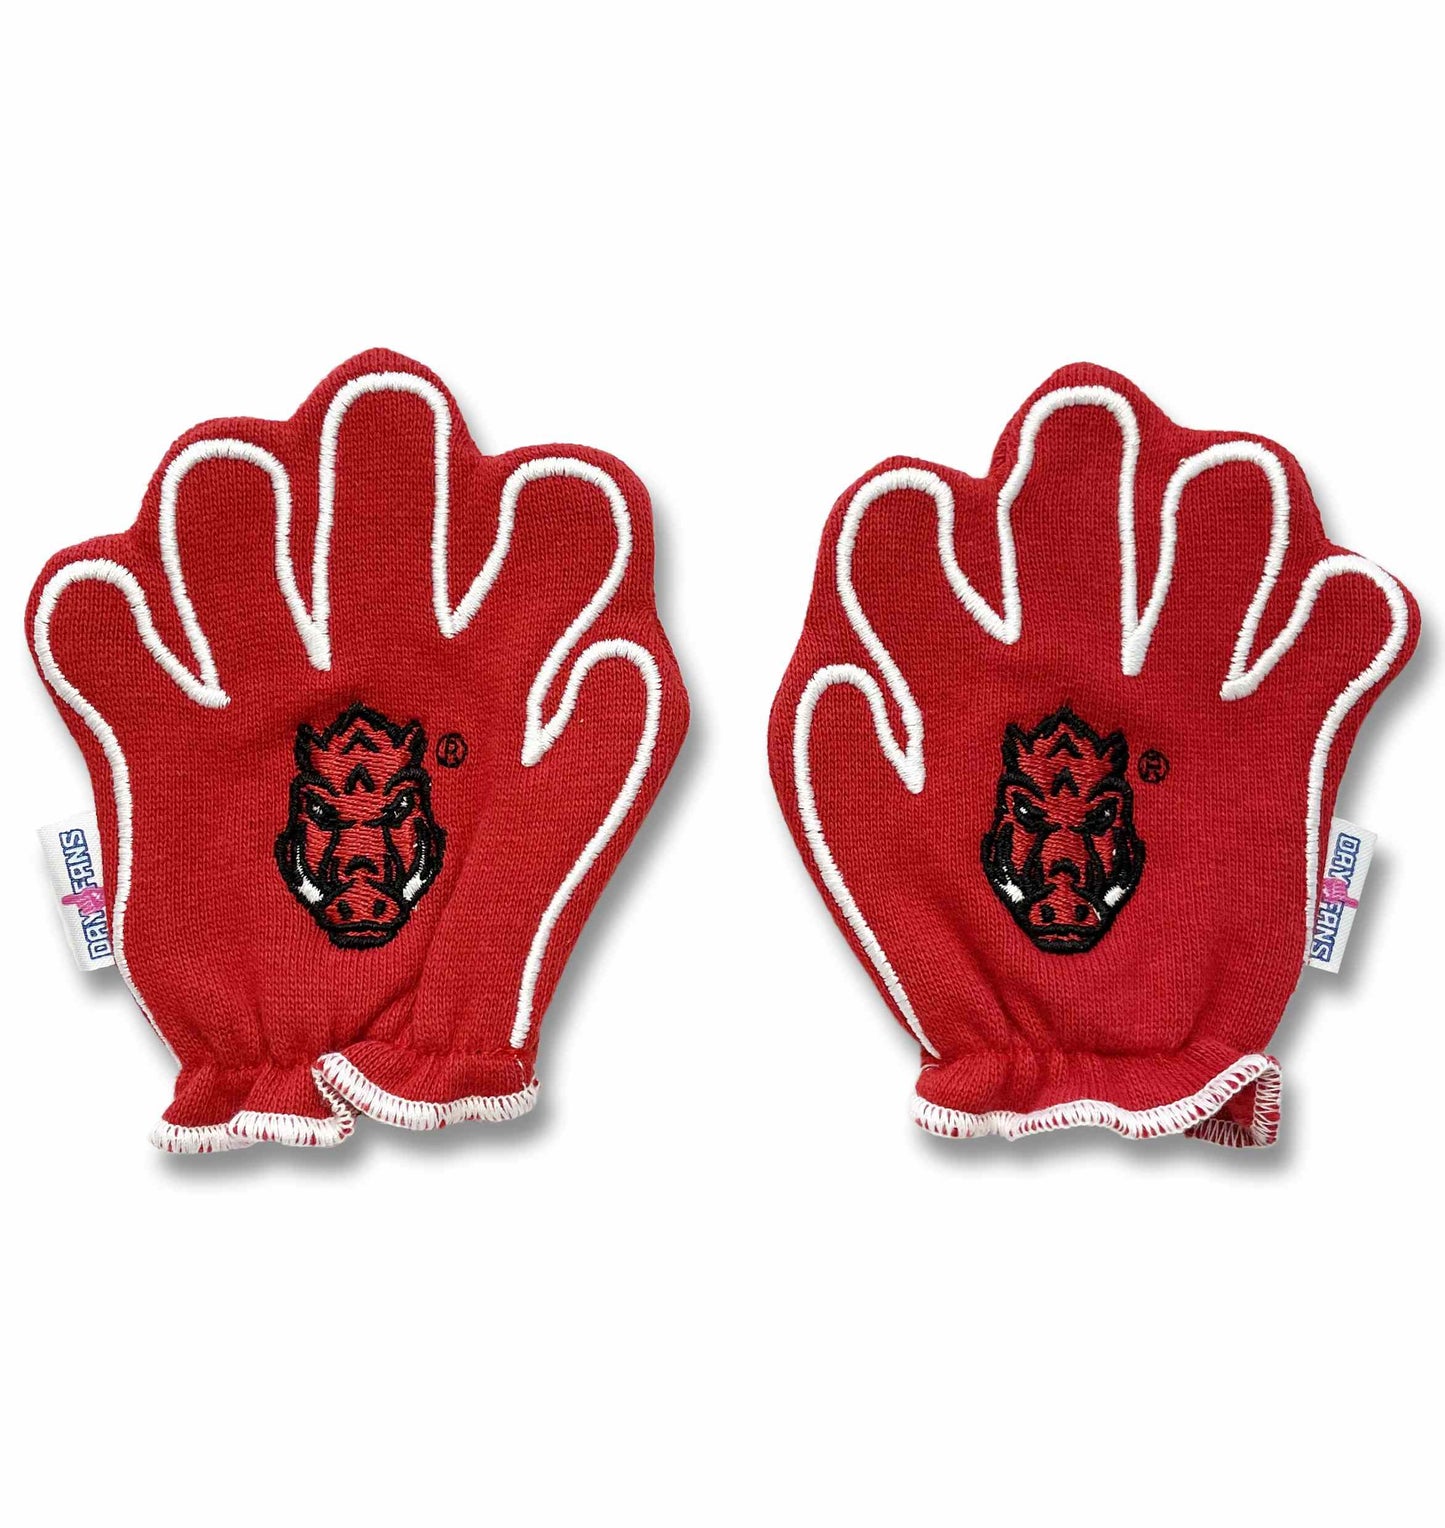 Arkansas Wooo Pig FanMitts Baby Mittens Cardinal Red Back Pair